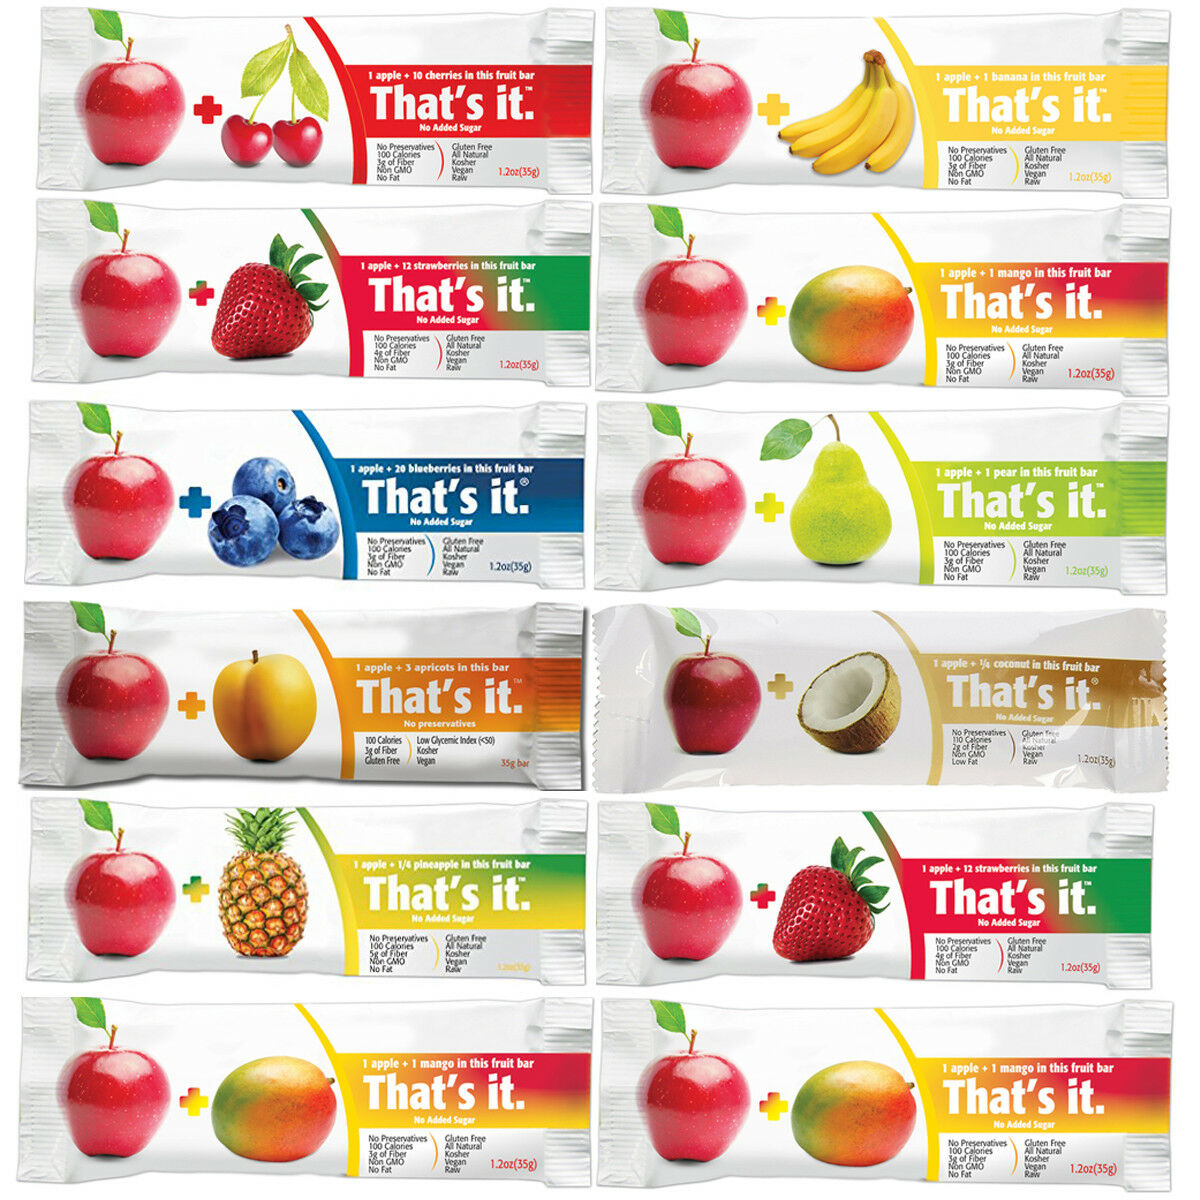 12 That's It Fruit Bar, Many Flavor Apple Apricot Strawberry BlueBerry Cherry et